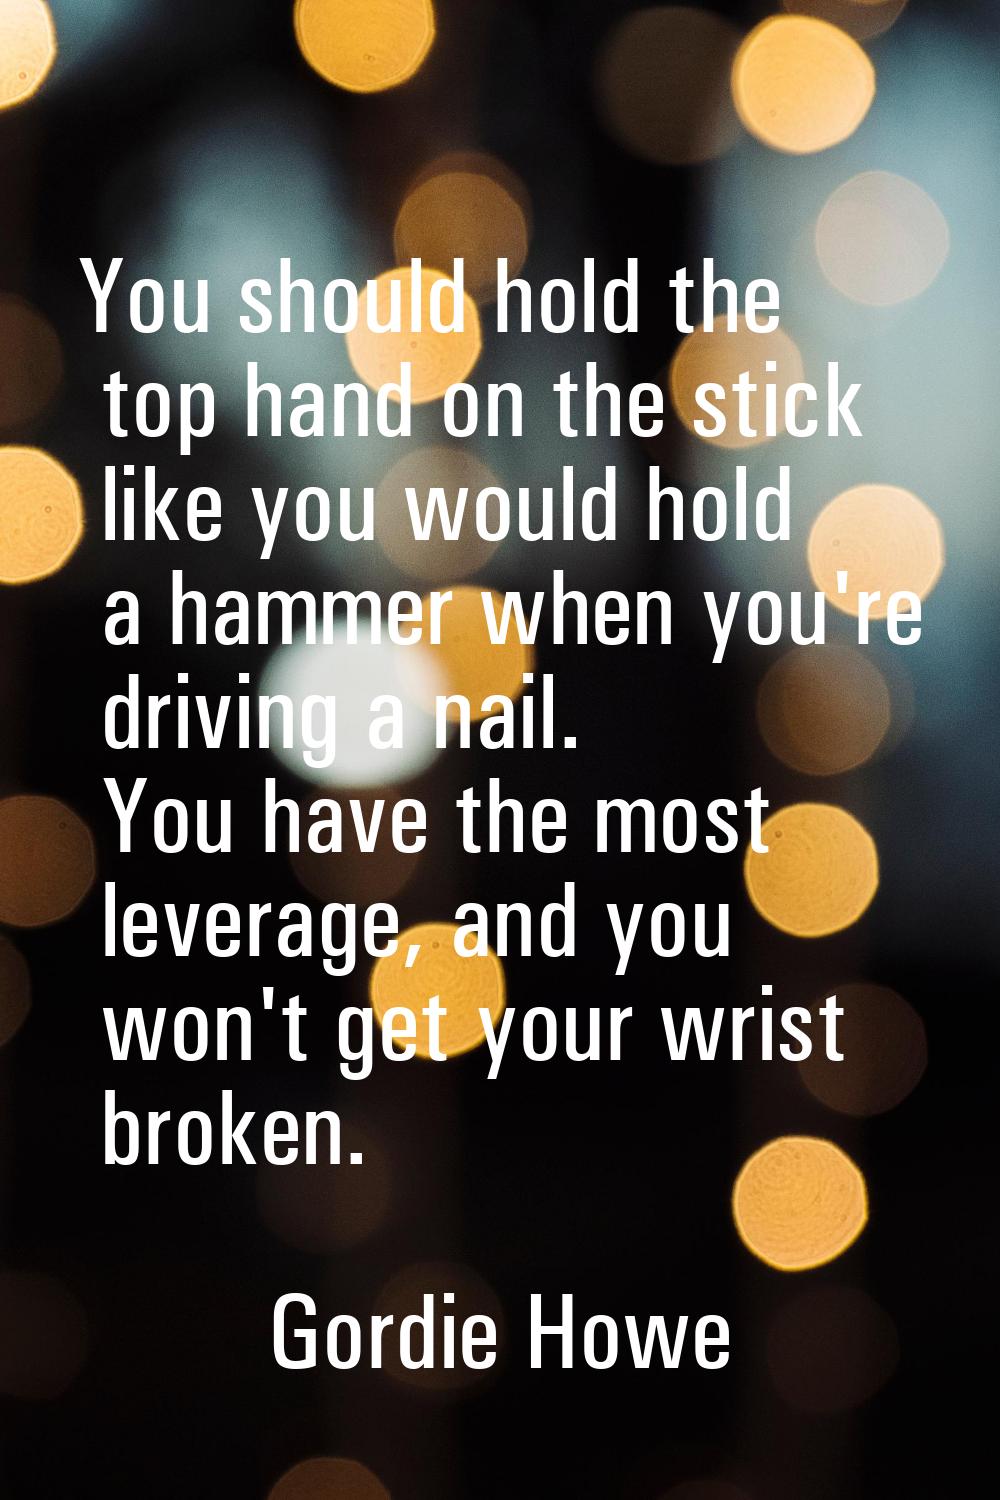 You should hold the top hand on the stick like you would hold a hammer when you're driving a nail. 